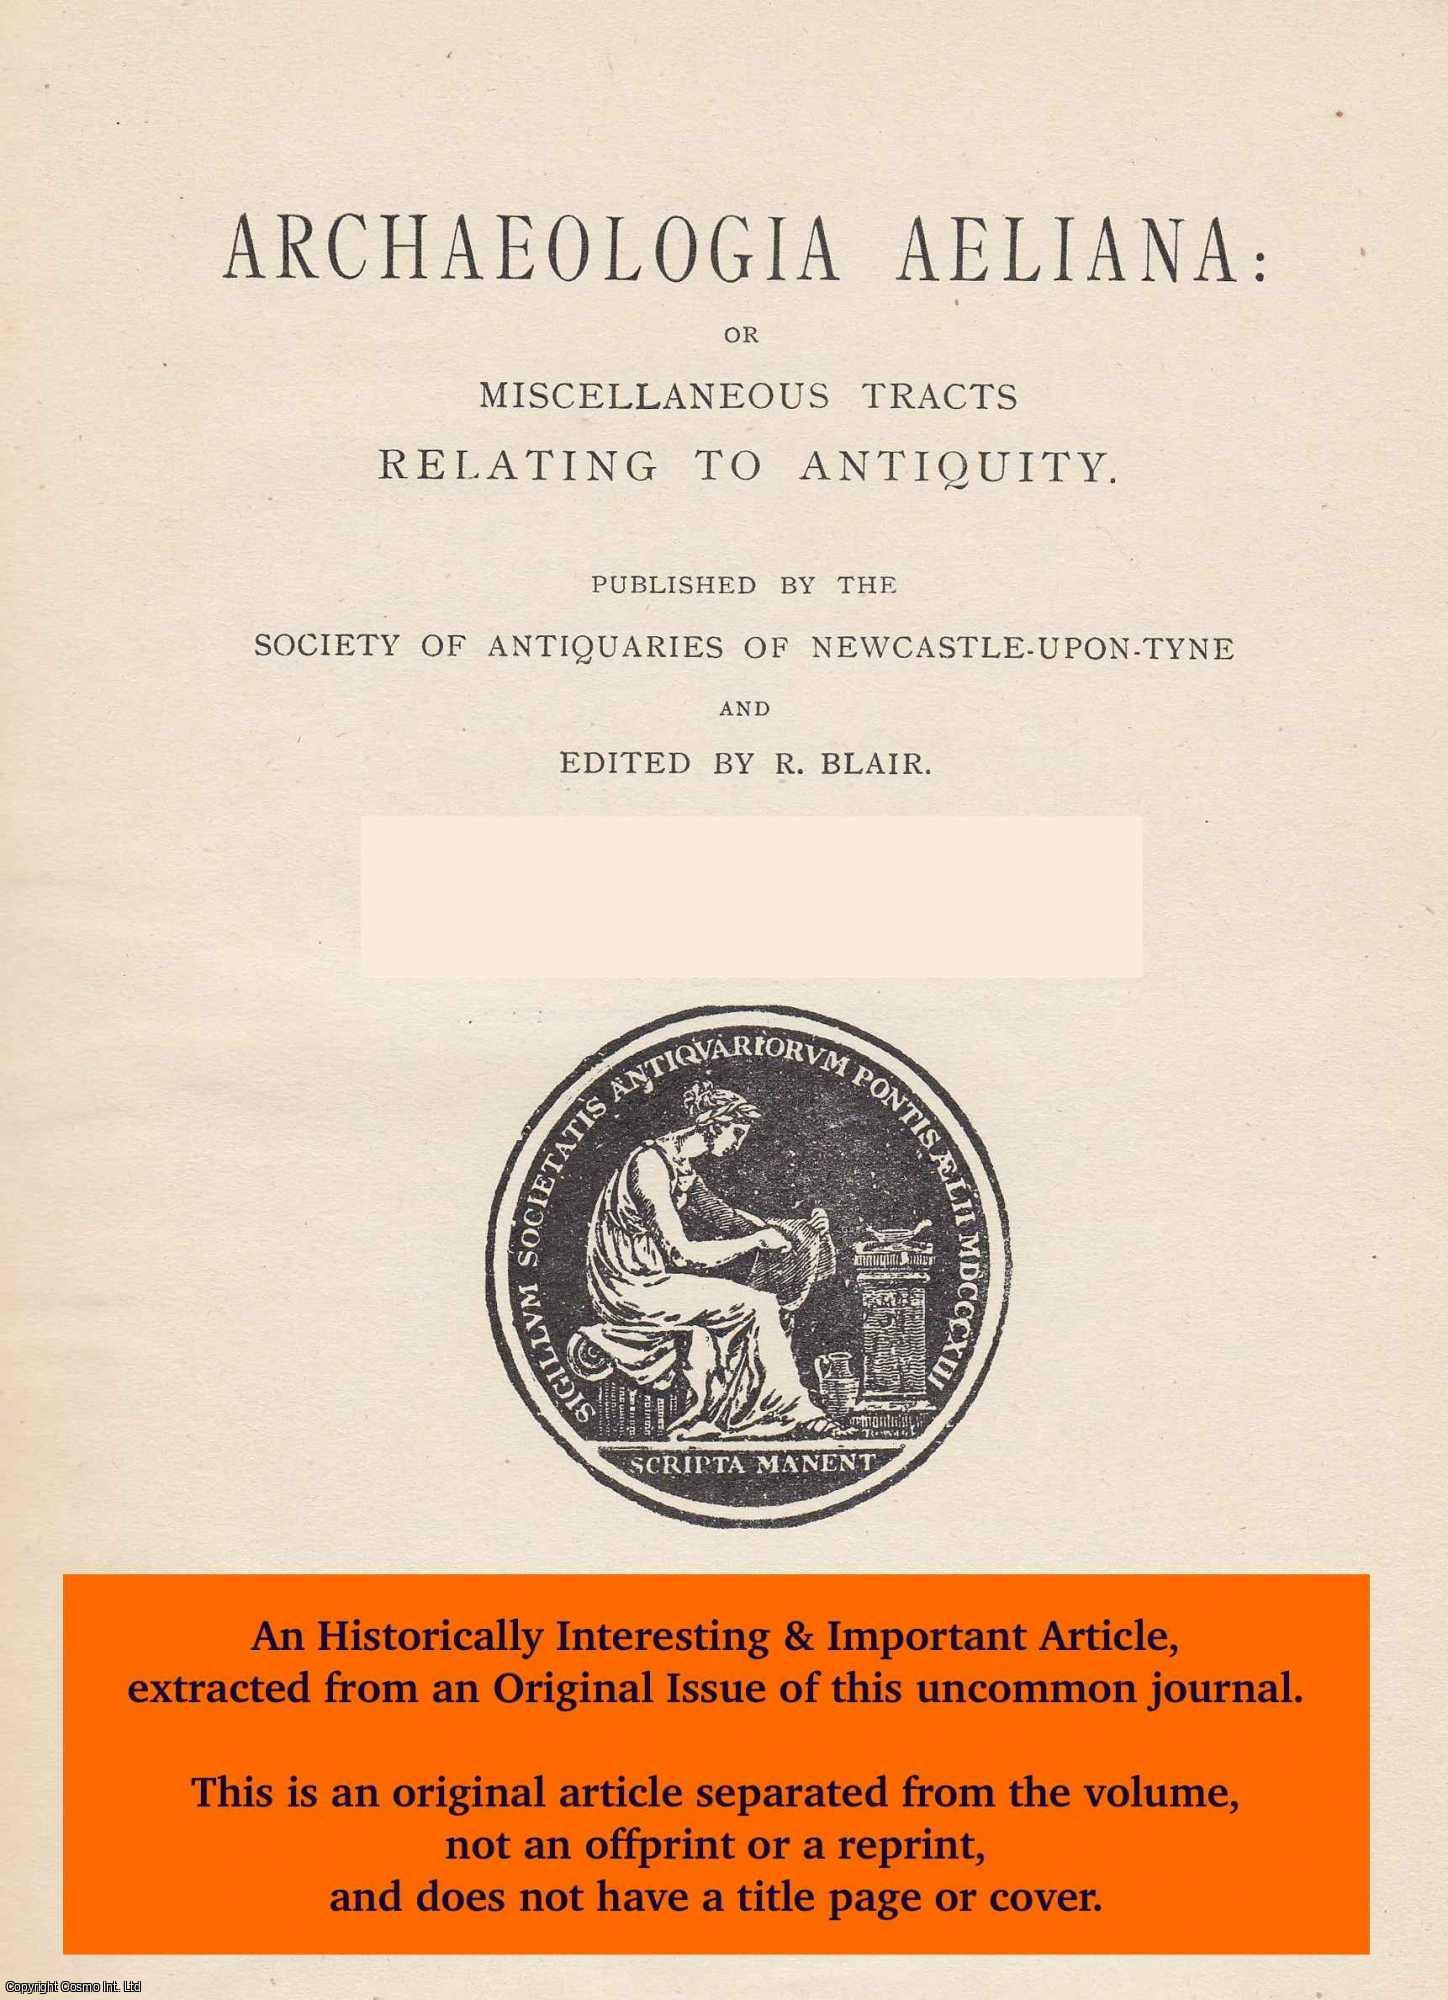 John Stephenson Robson, John Stephenson - Some Account of The Incorporated Company of Free Joiners of Newcastle-Upon-Tyne. An original article from The Archaeologia Aeliana: or Miscellaneous Tracts Relating to Antiquity, 1909.